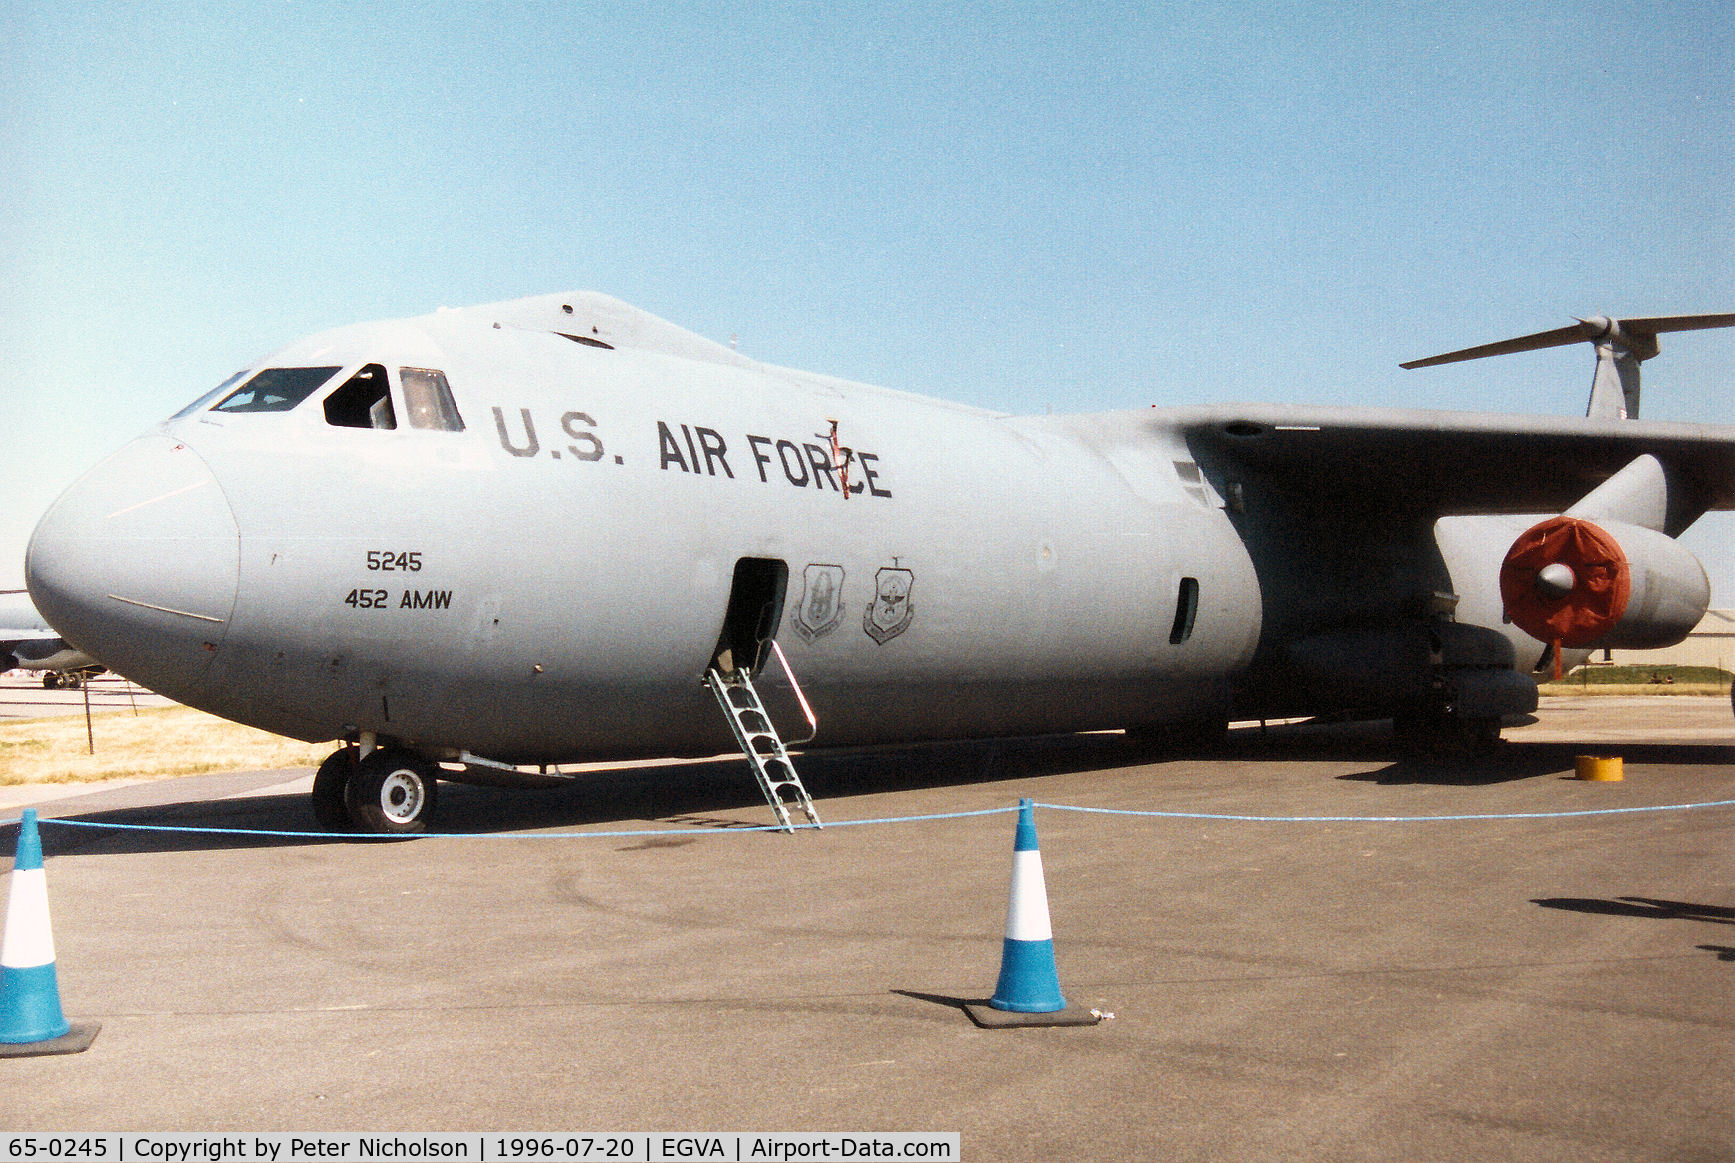 65-0245, 1965 Lockheed C-141B Starlifter C/N 300-6096, C-141B Starlifter of the 452nd Air Mobility Wing at March AFB on display at the 1996 Royal Intnl Air Tattoo at RAF Fairford.